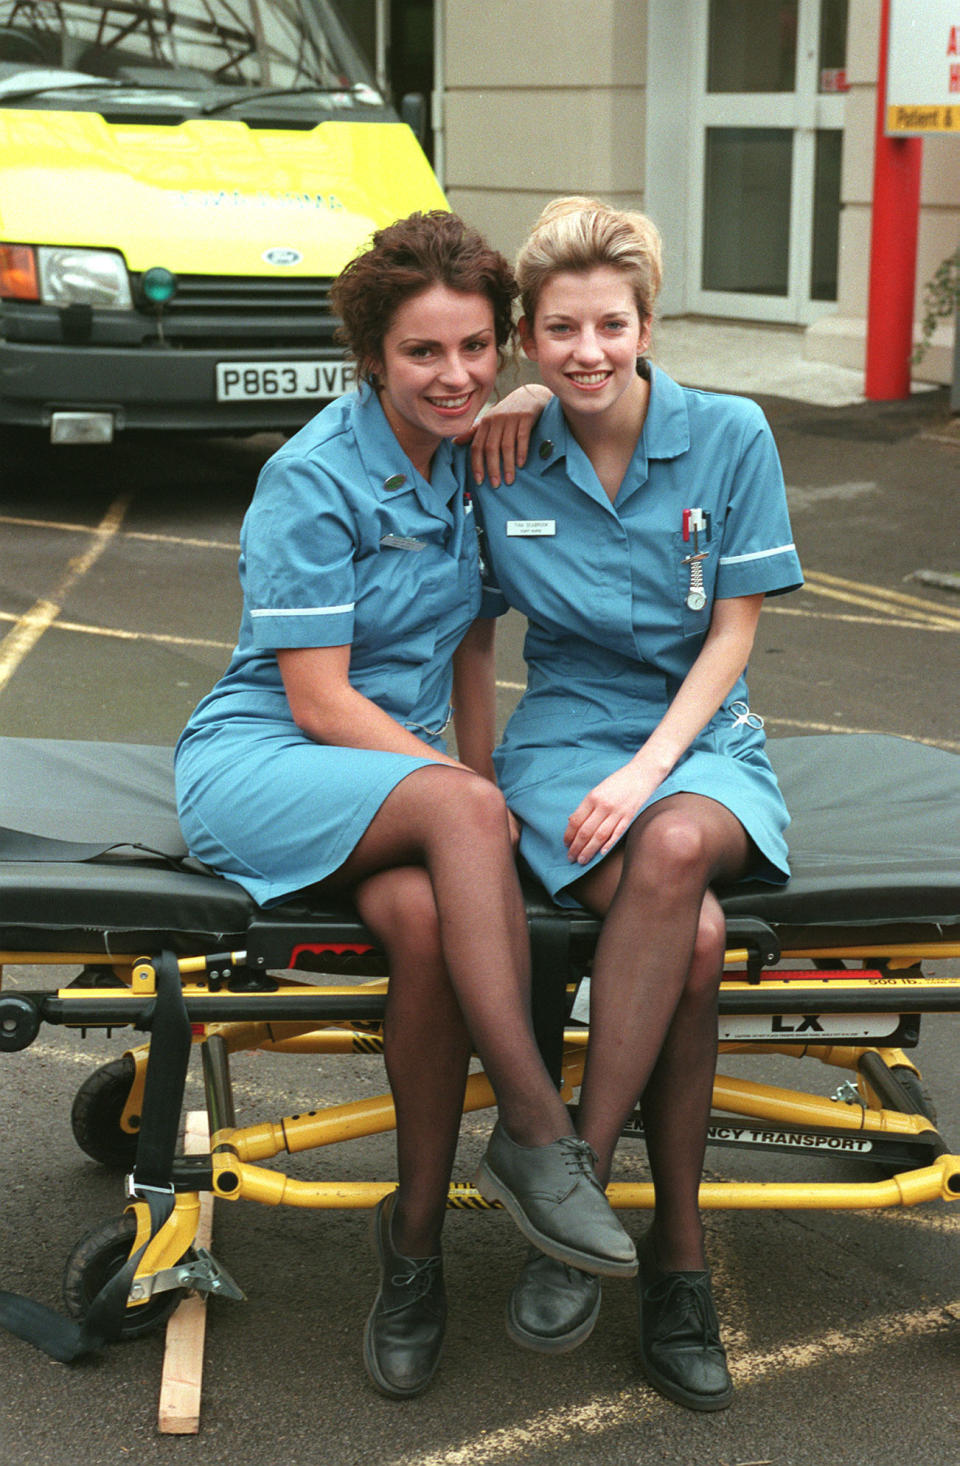 JAN ANDERSON (LEFT) WHO PLAYS STAFF NURSE CHLOE HILL WITH CLAIRE GOOSE WHO PLAYS STAFF NURSE TINA SEABROOK IN THE BBC TV HOSPITAL DRAMA, CASUALTY.   (Photo by Jay Williams - PA Images/PA Images via Getty Images)